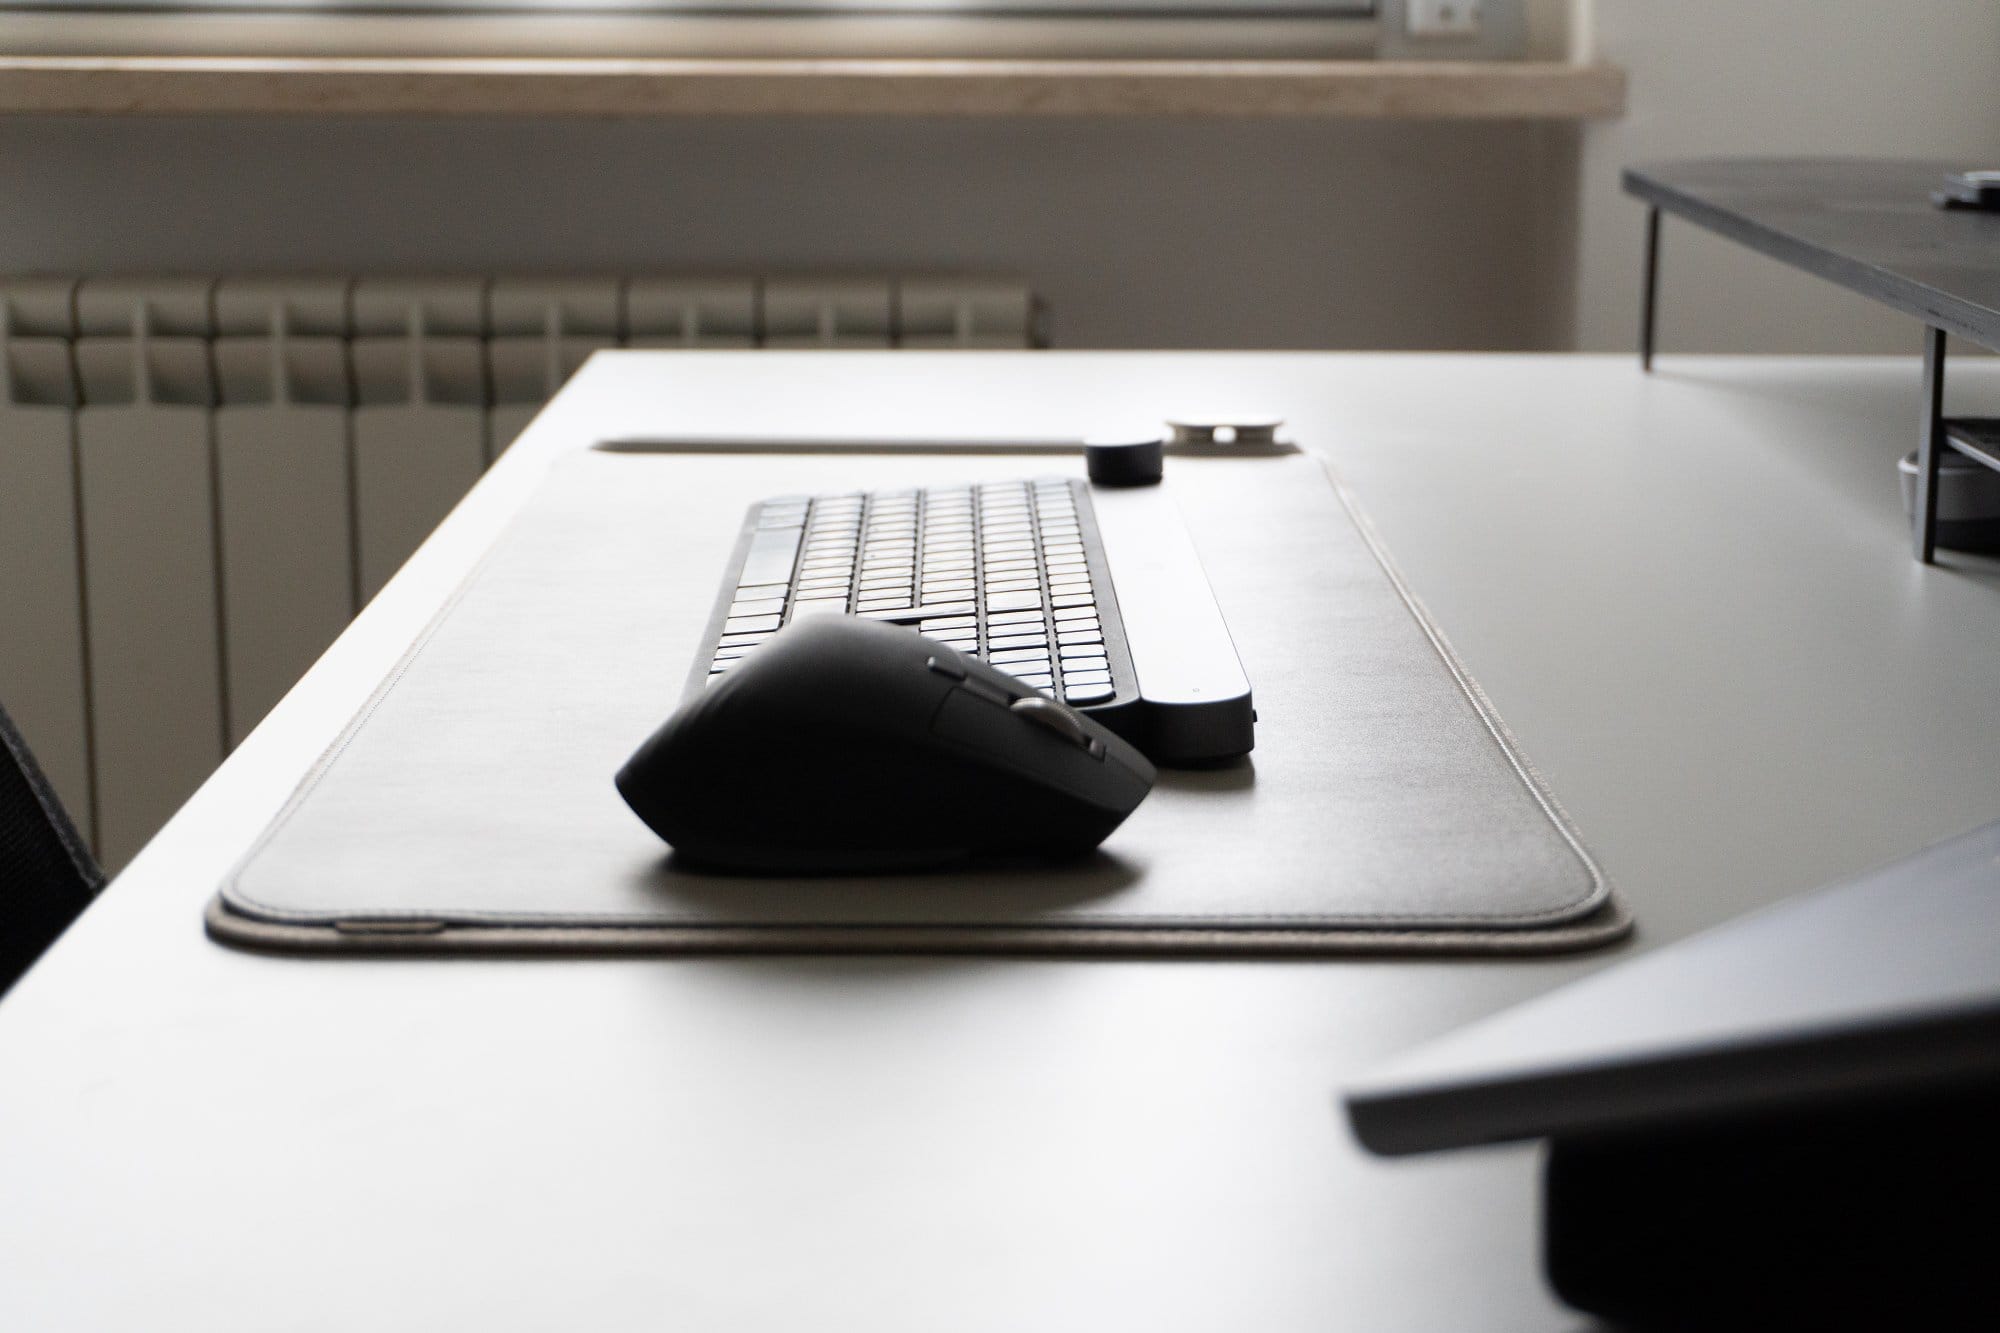 An ergonomic mouse and keyboard on a grey mat on a white desk, with a blurred background